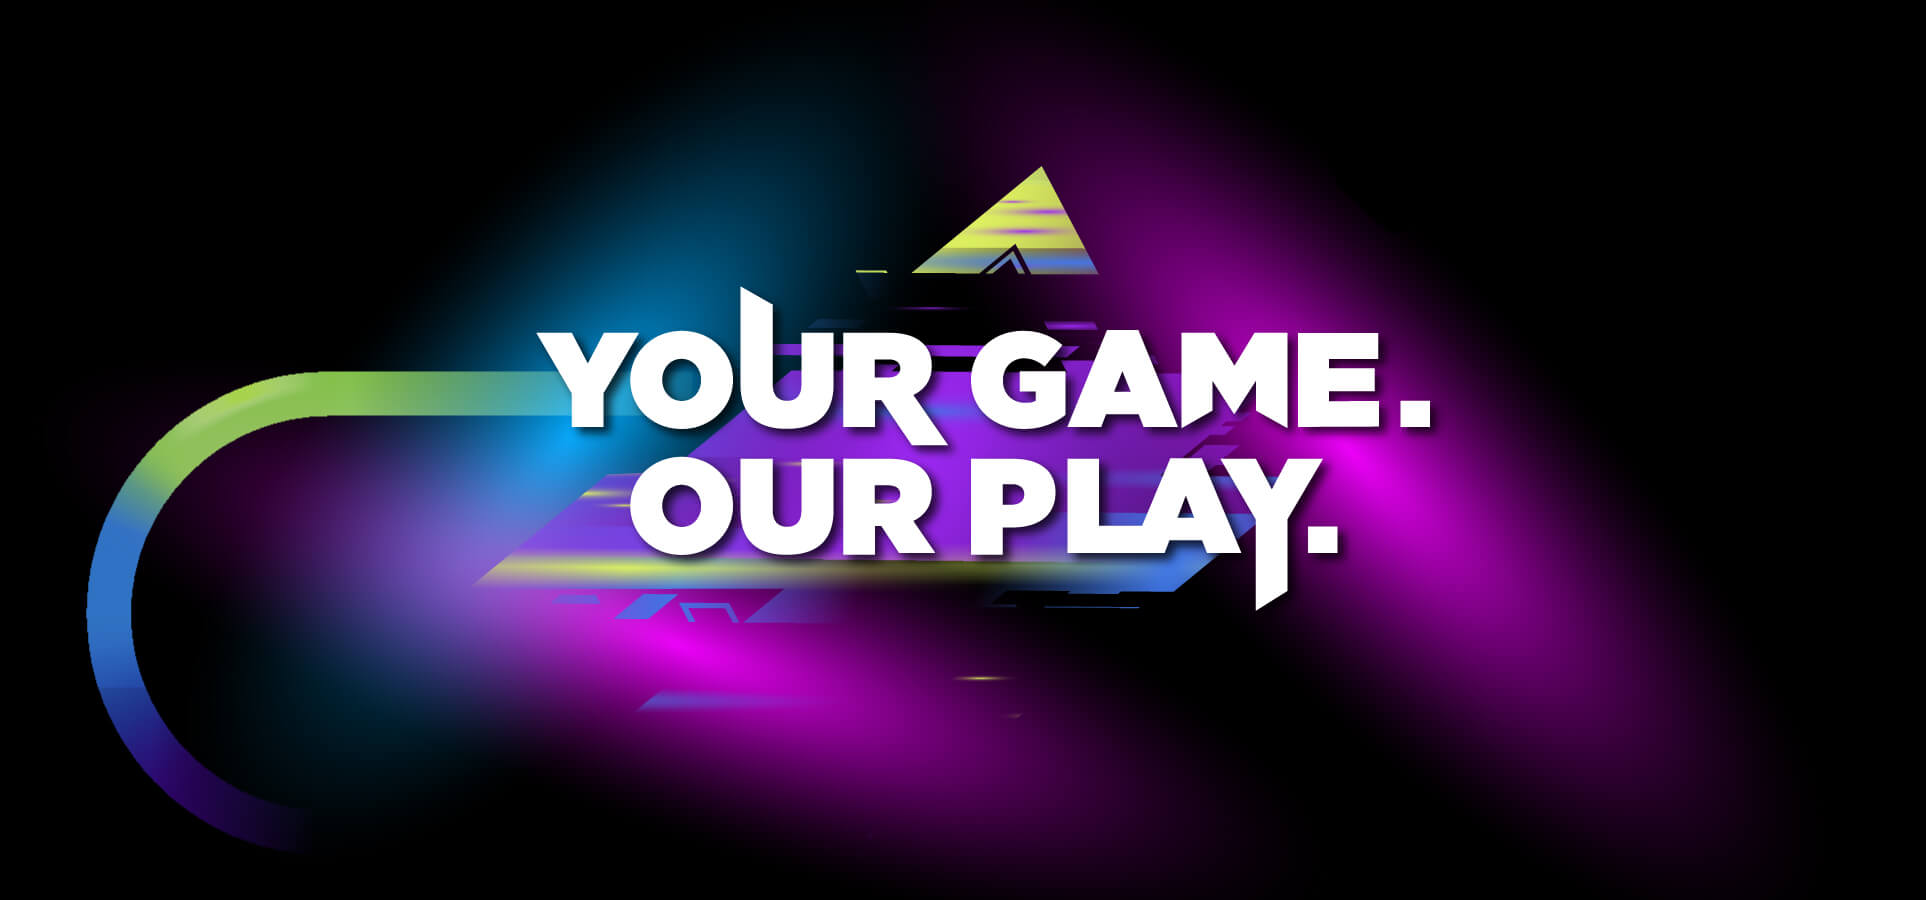 your game. our play.